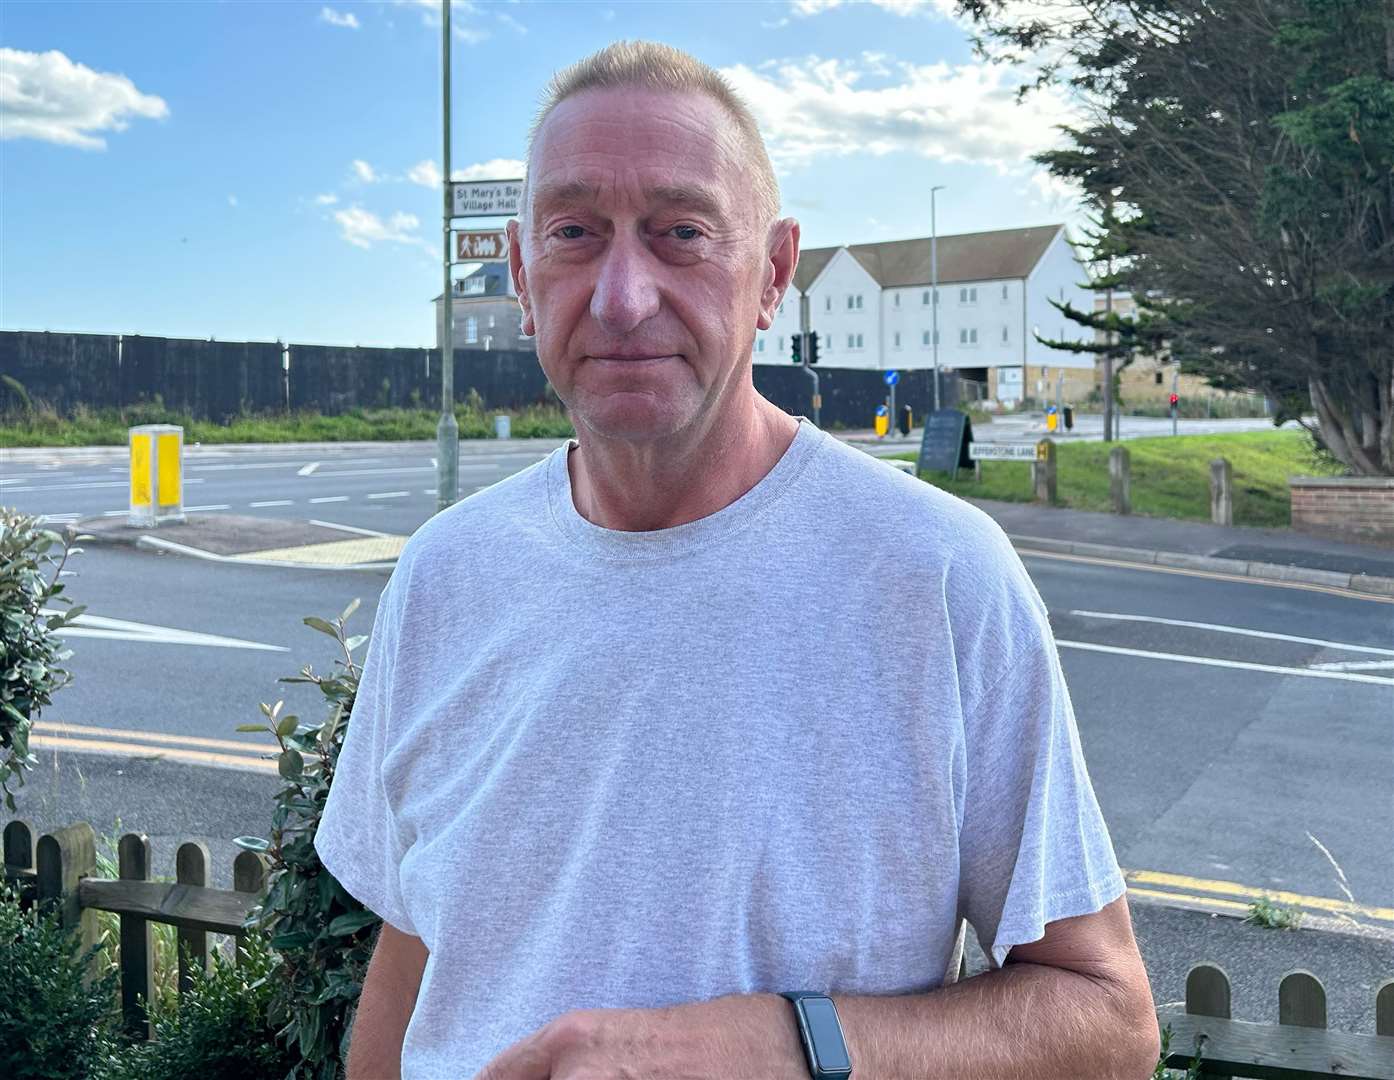 Mark Jones says he sometimes feels 'isolated' living in St Mary's Bay